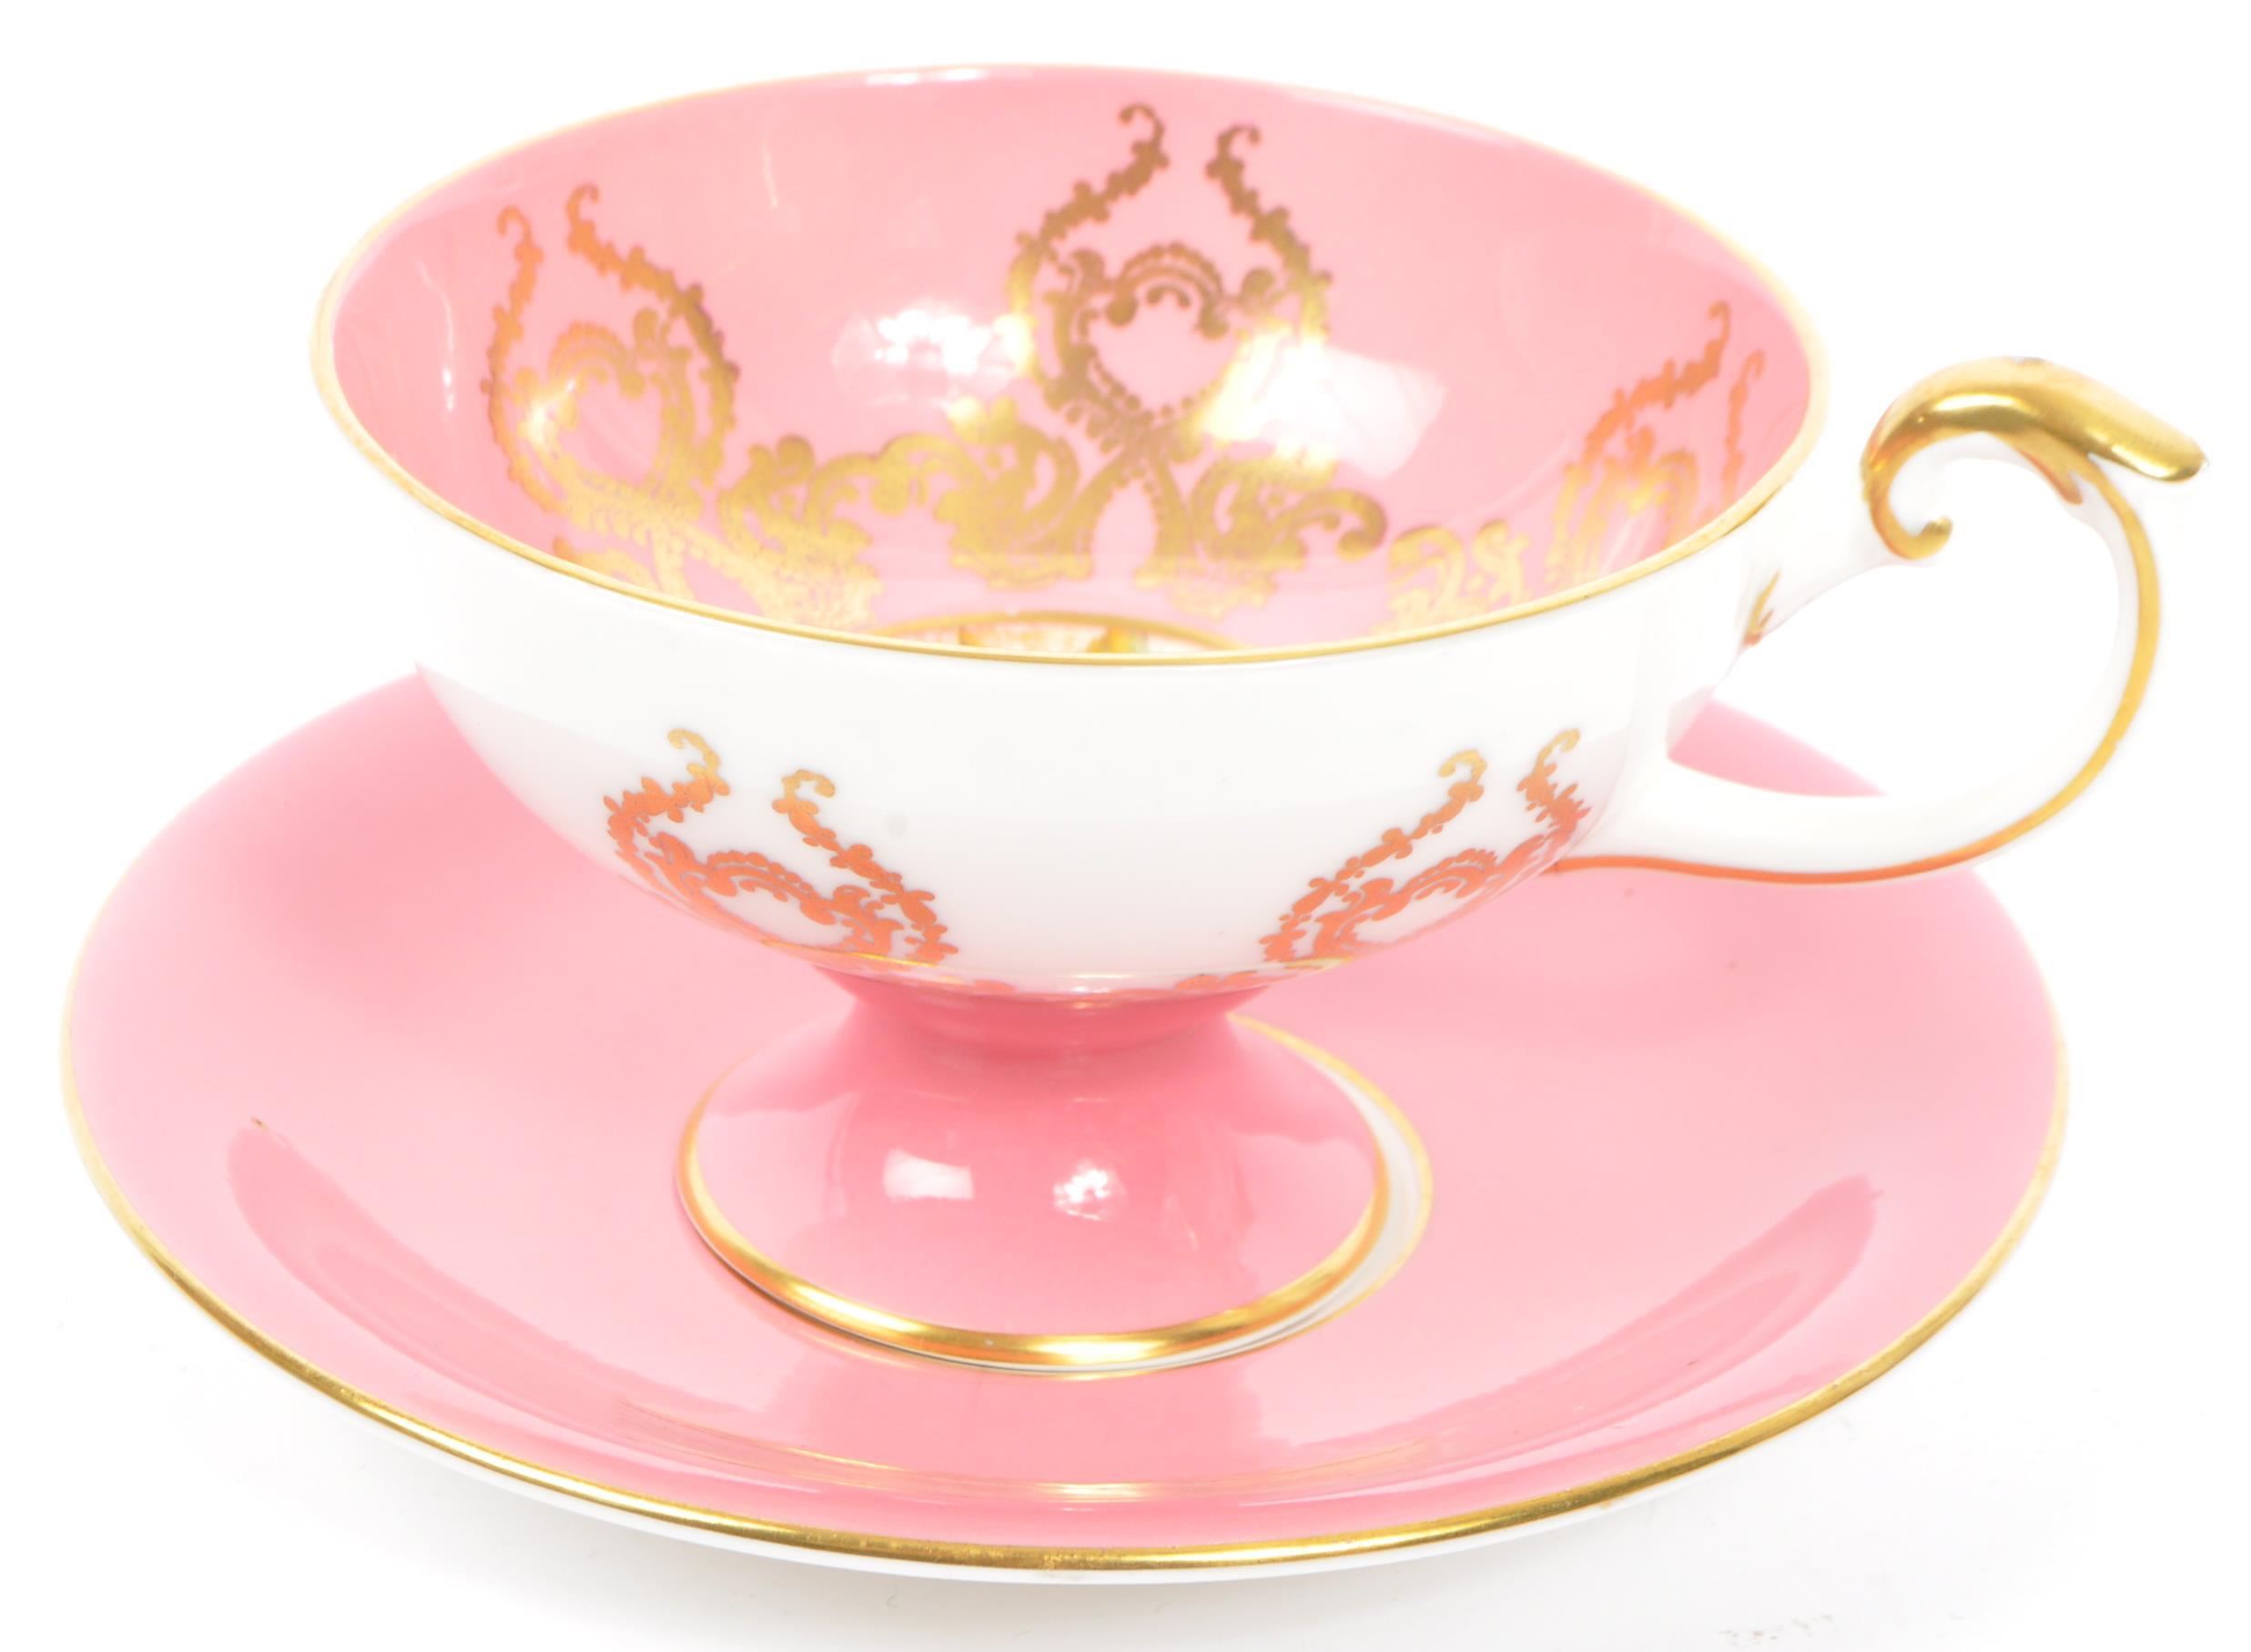 THREE PIECES AYNSLEY ORCHARD GOLD TEACUP & SAUCER - Image 3 of 7